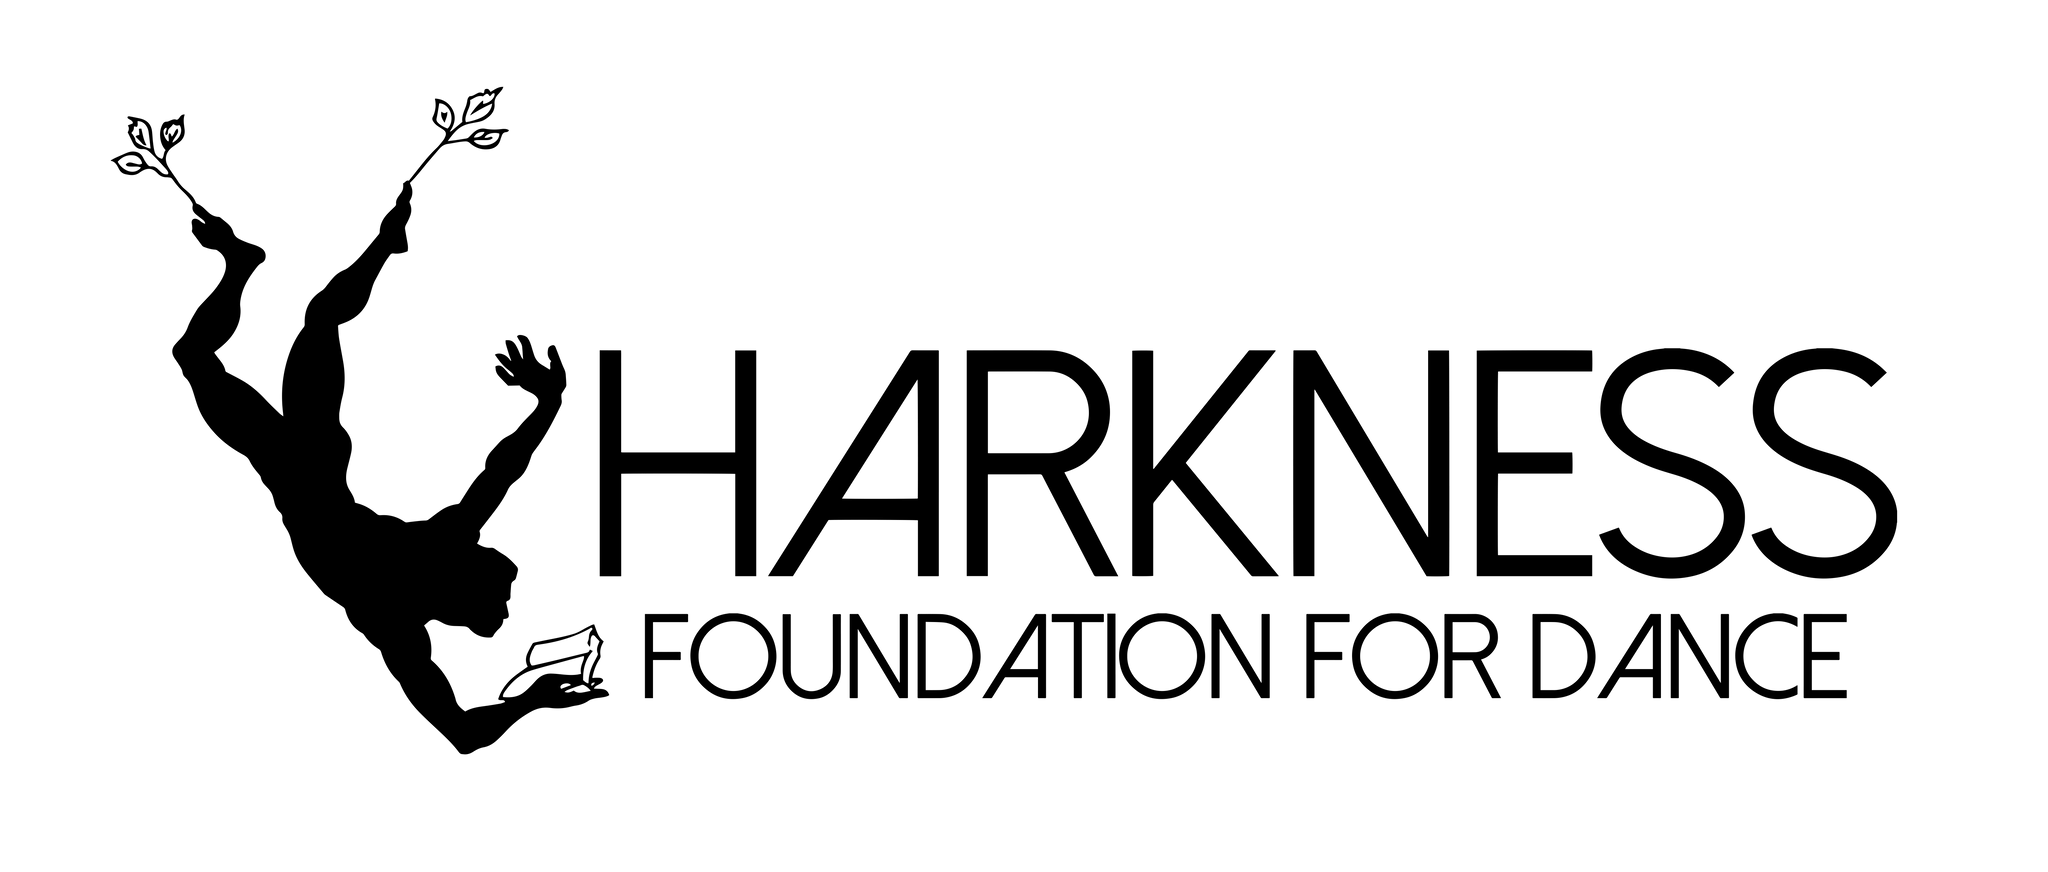 Harnkess Foundation for Dance logo, including the organization's name and the outline of a human figure upside down holding a book.